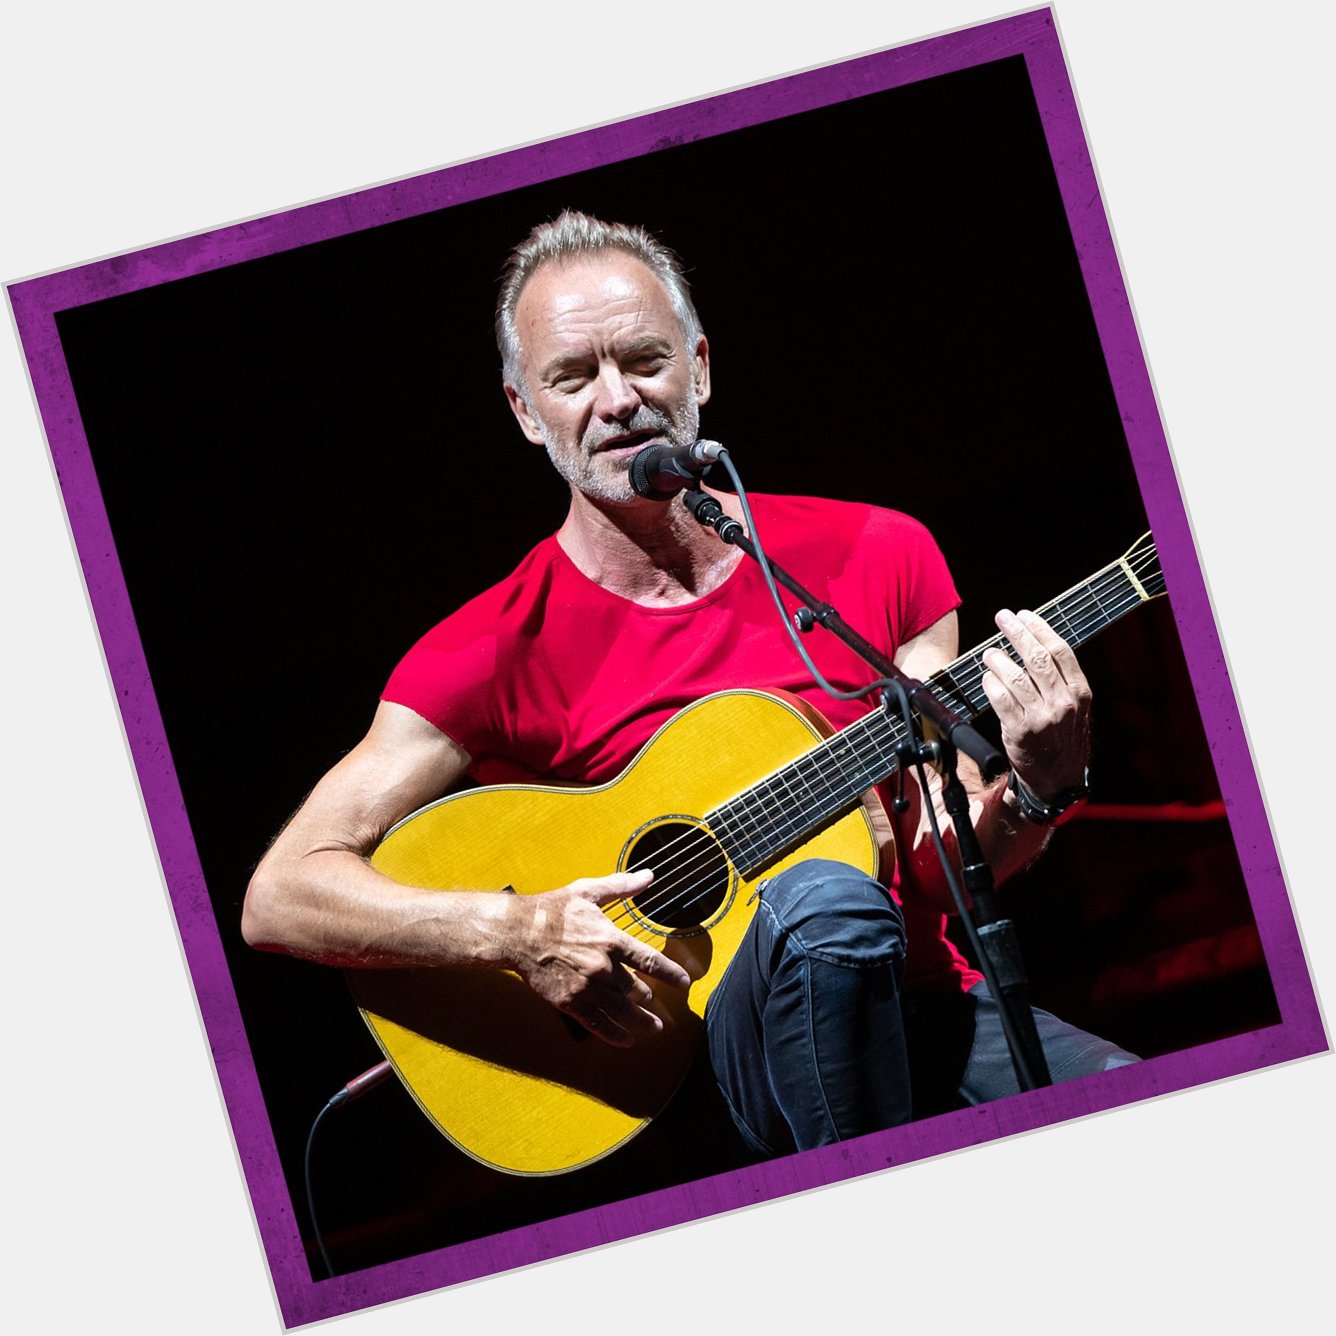 Wishing Sting a happy birthday today! 68 years old and a still a British music legend 